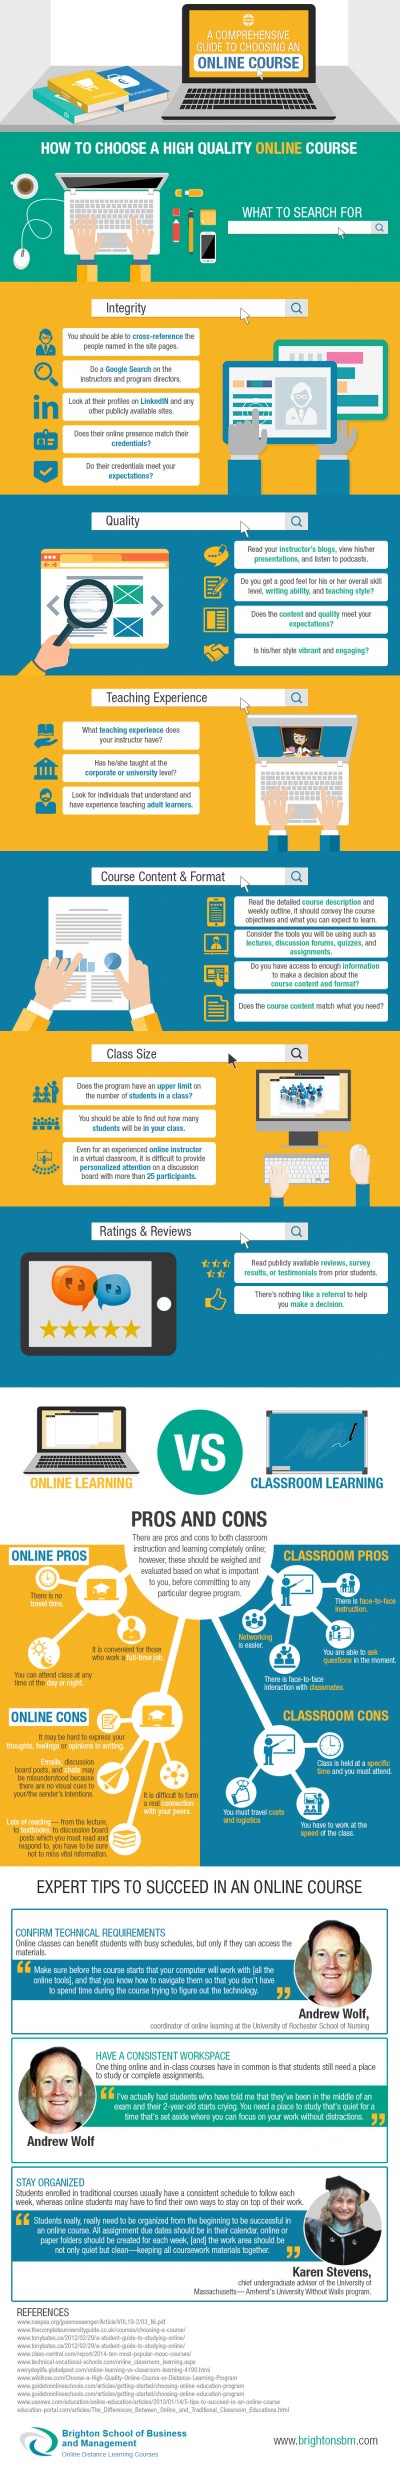 Guide-to-choosing-an-online-course-Infographic